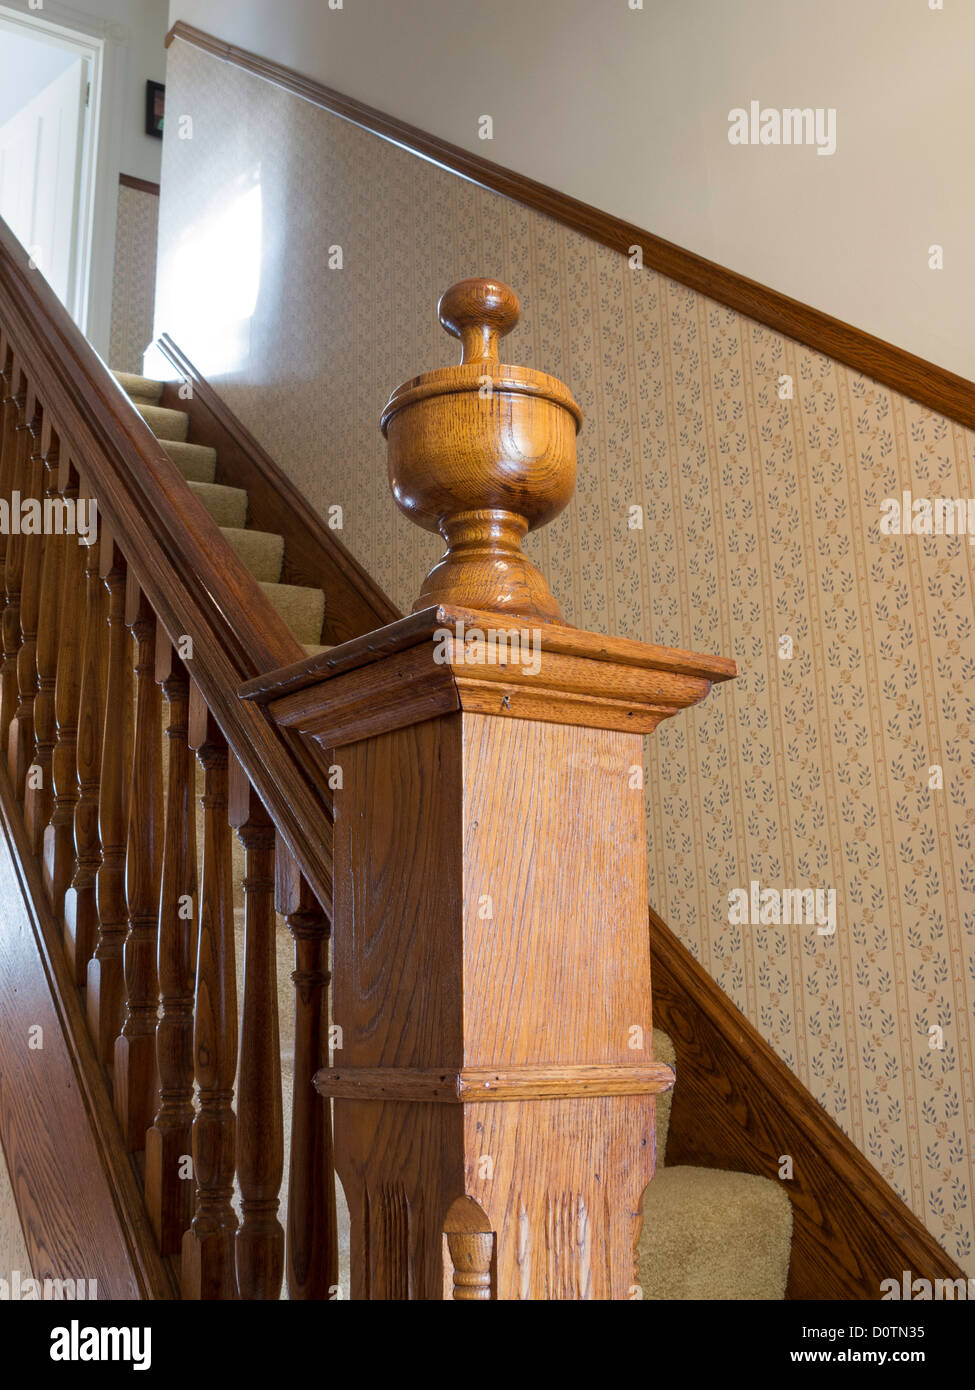 Decorative Finial on Newel Post ,Balustrade and Staircase, Residential House Stock Photo